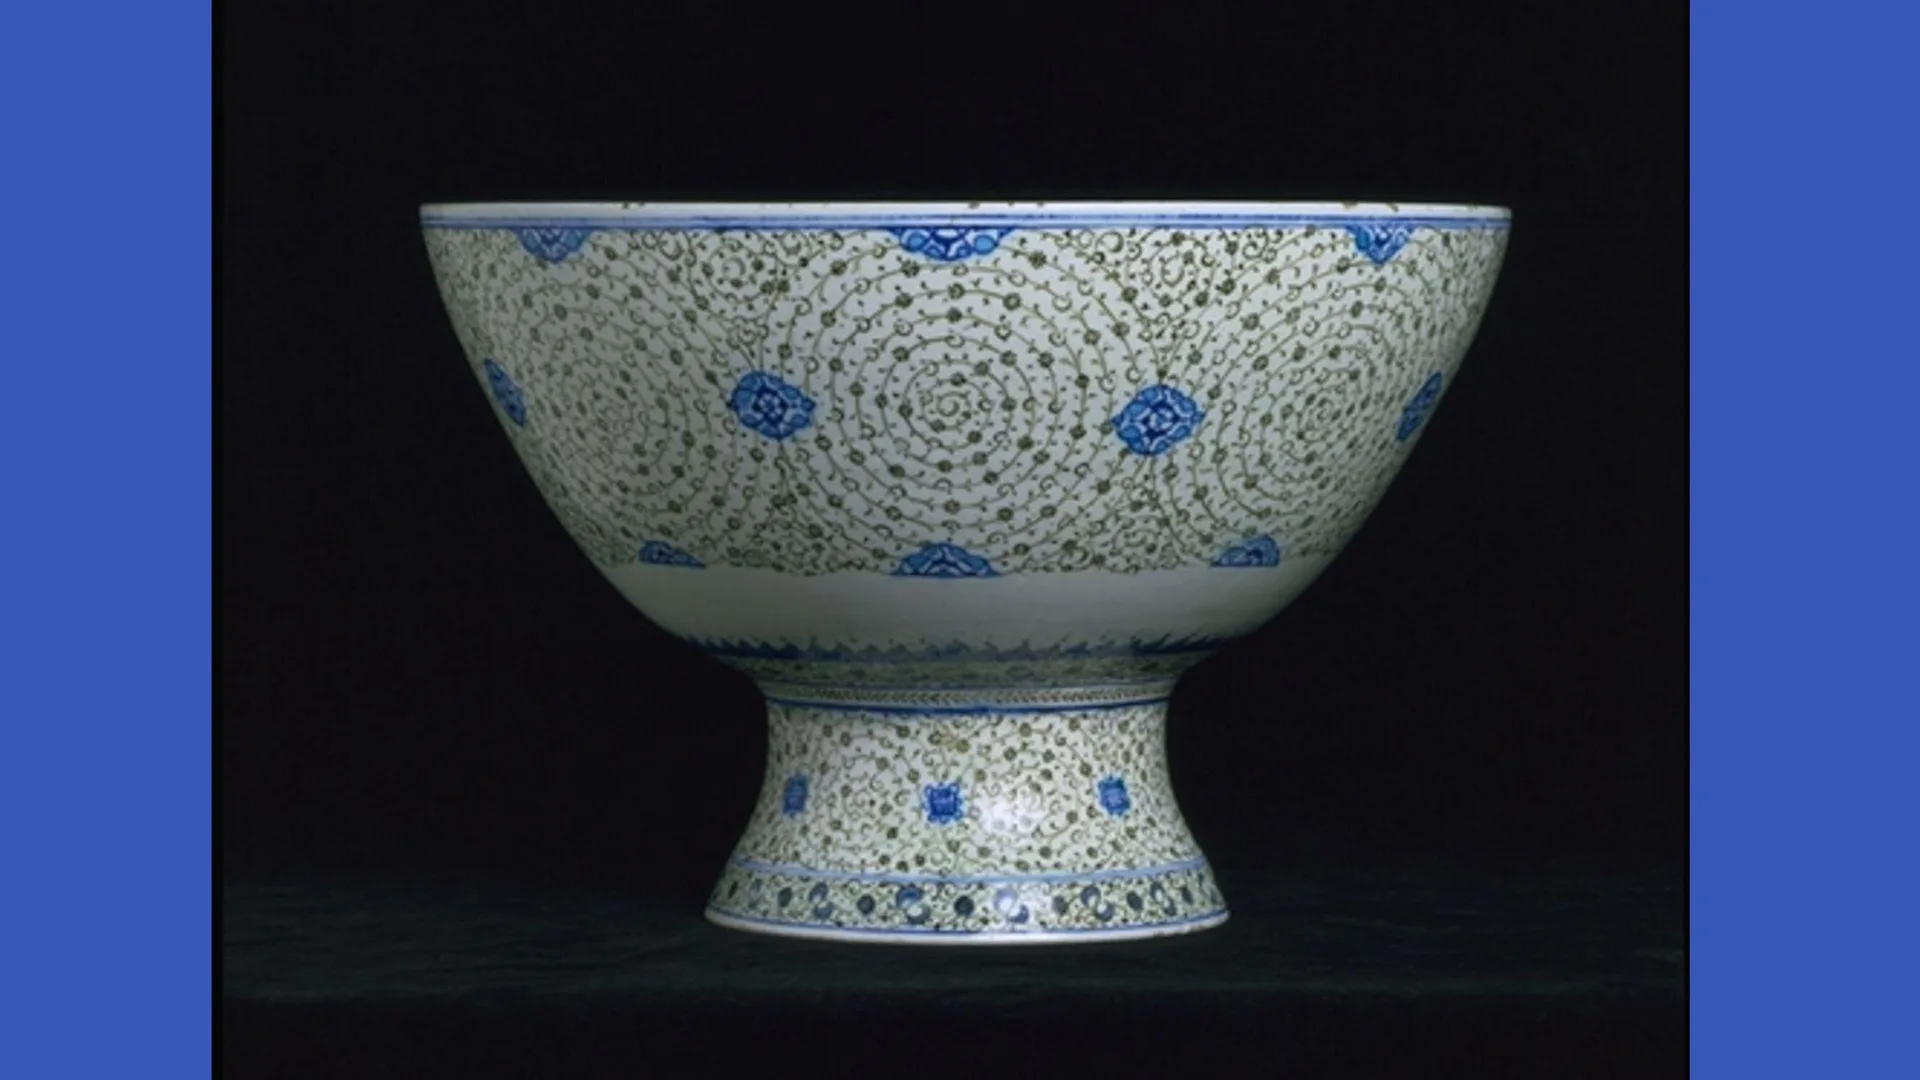 A photograph of a porcelain blue and white bowl with painted decorations against a black background with blue borders